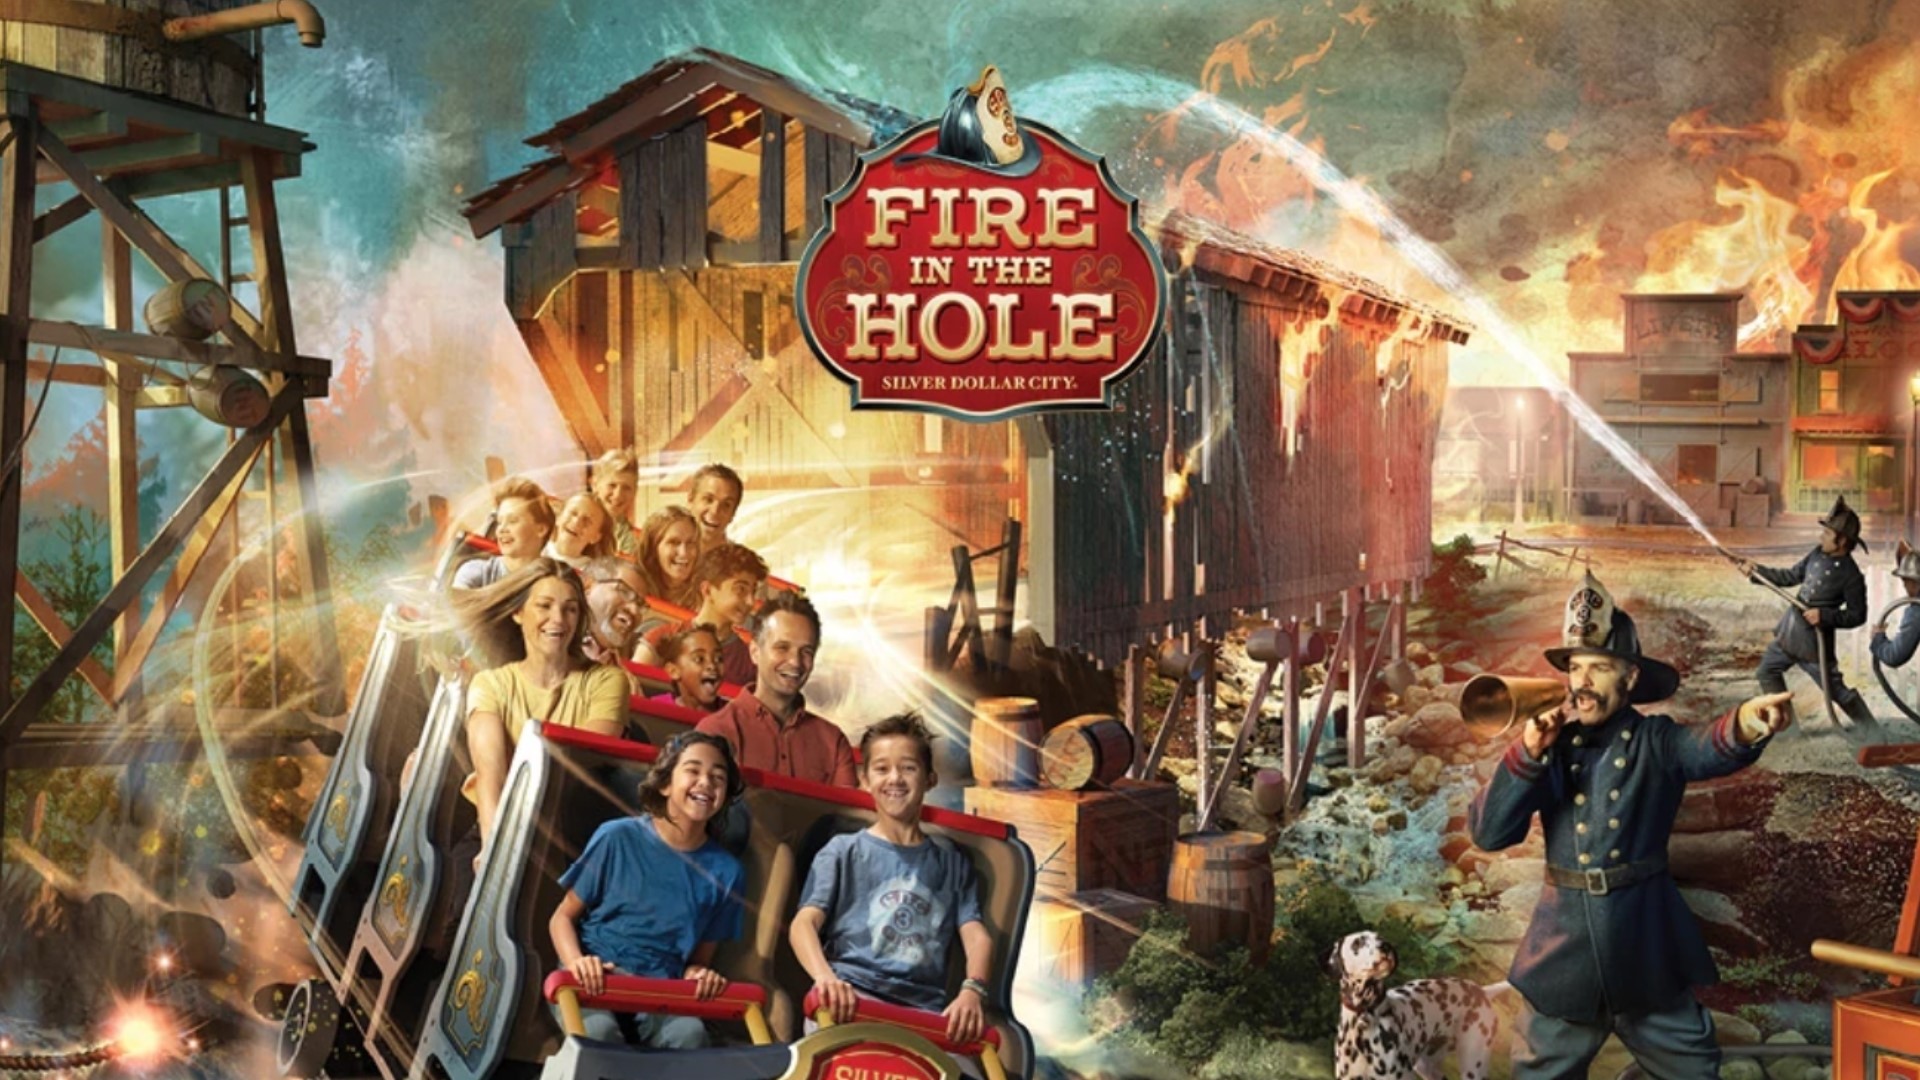 Silver Dollar City in Branson announced the groundbreaking of the new Fire in the Hole! indoor rollercoaster on Monday.